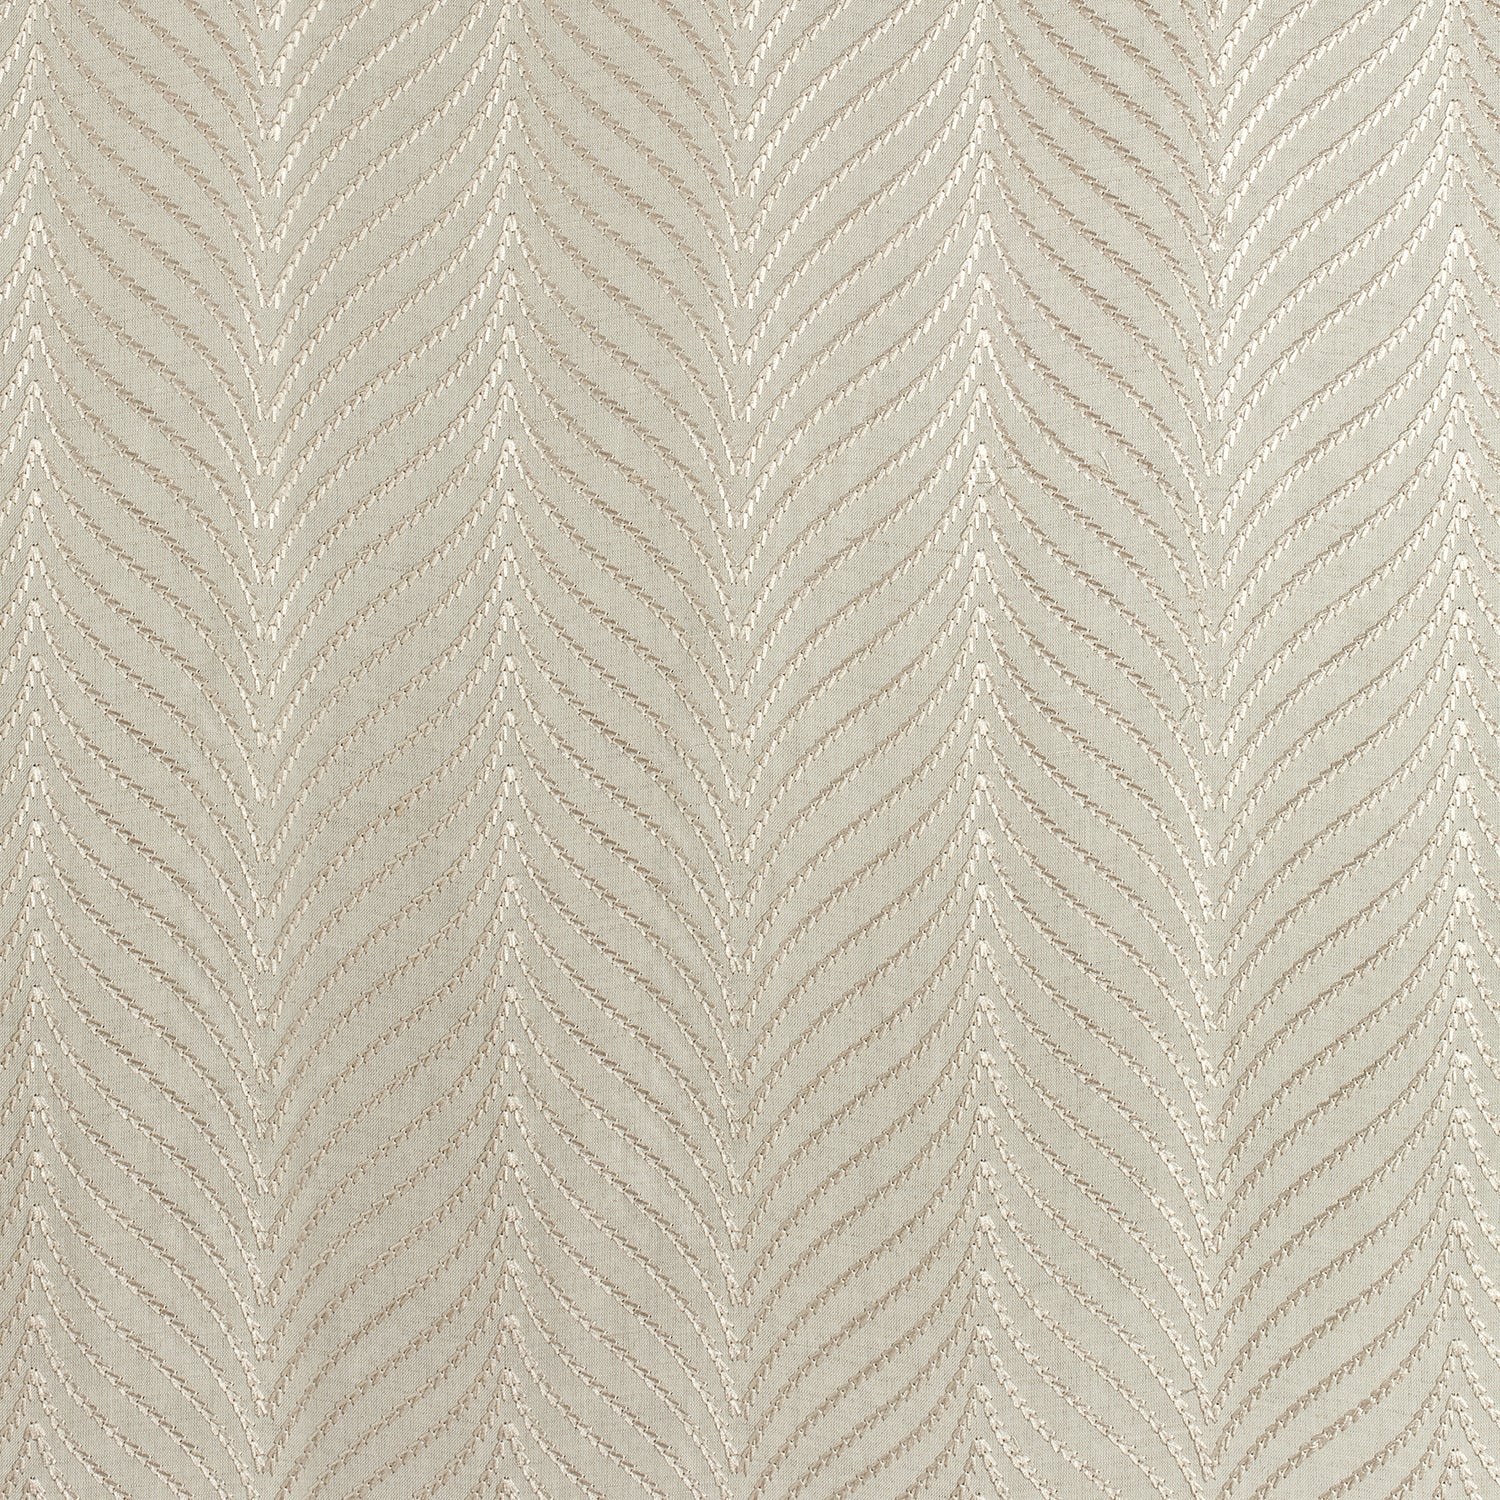 Clayton Herringbone Embroidery fabric in natural color - pattern number W775443 - by Thibaut in the Dynasty collection